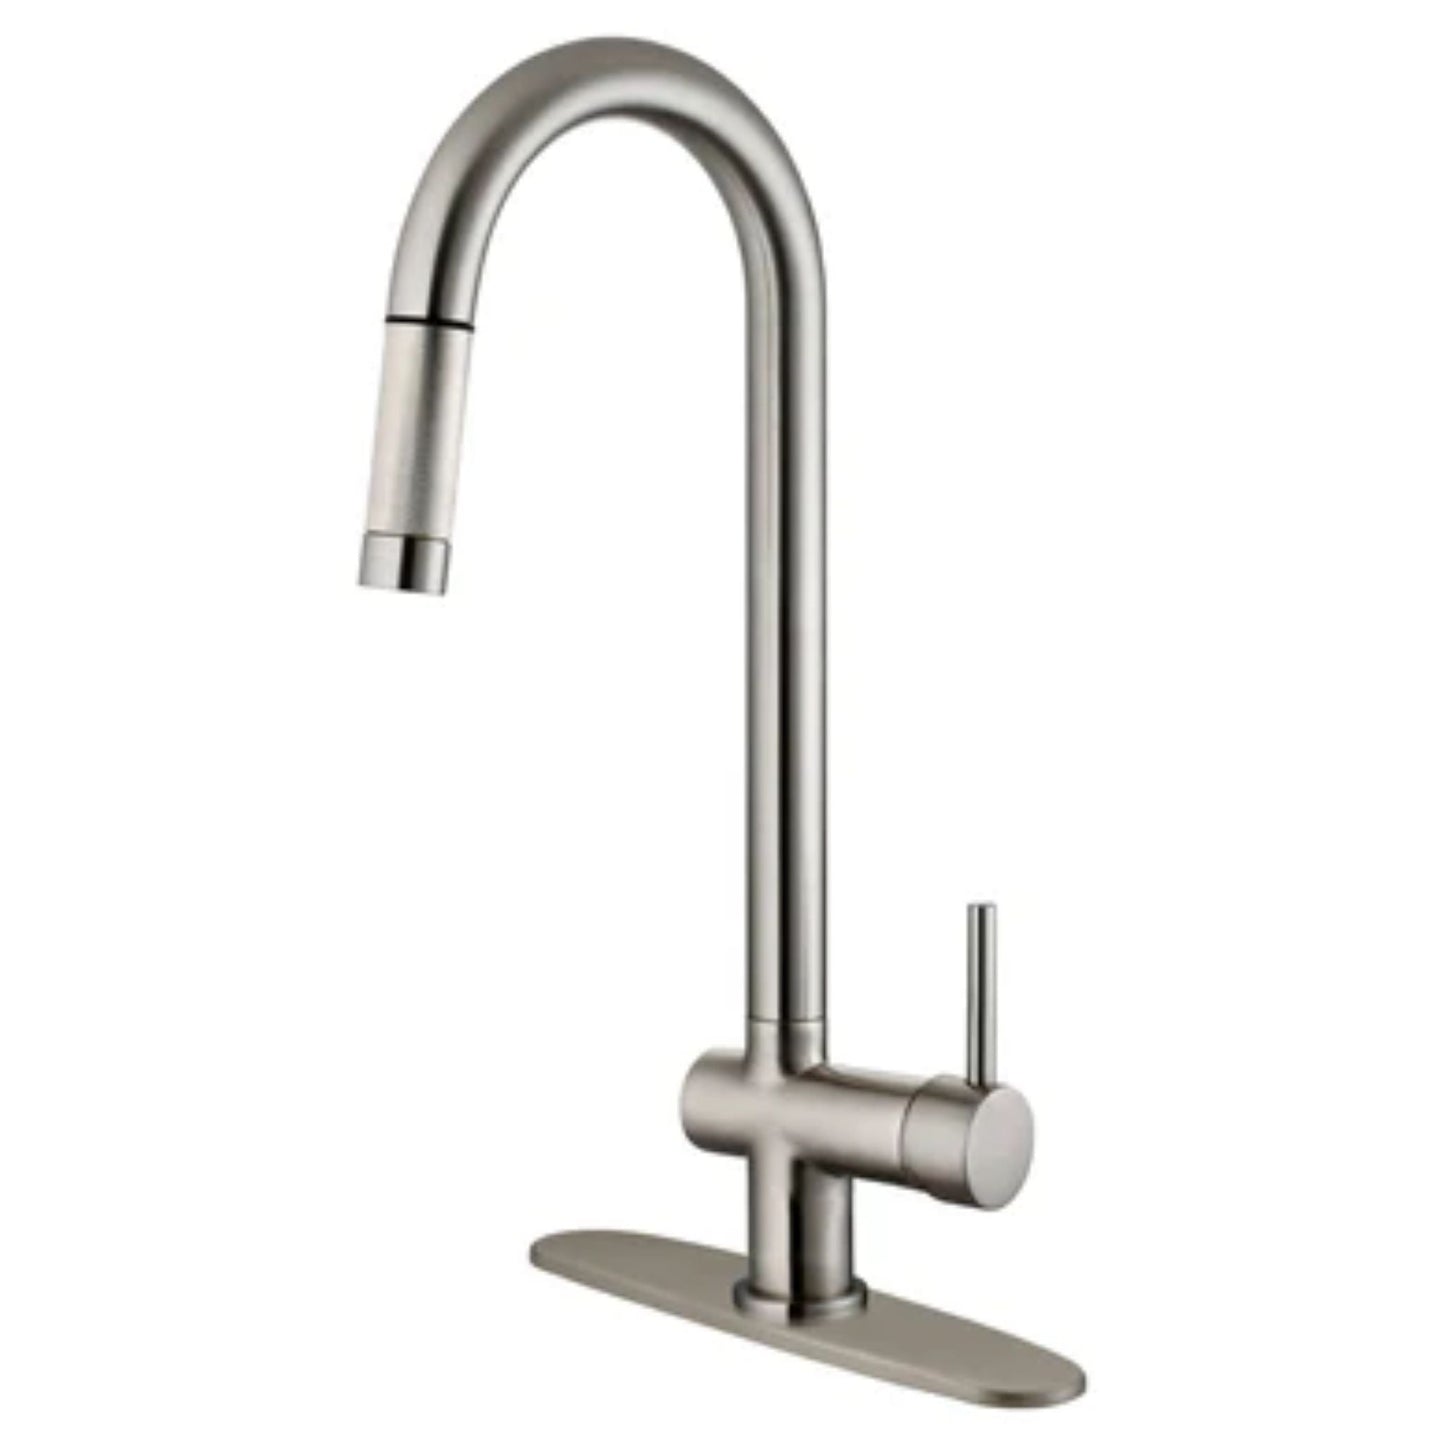 LessCare Brushed Nickel Finish Pull Out Kitchen Faucet - LK13B